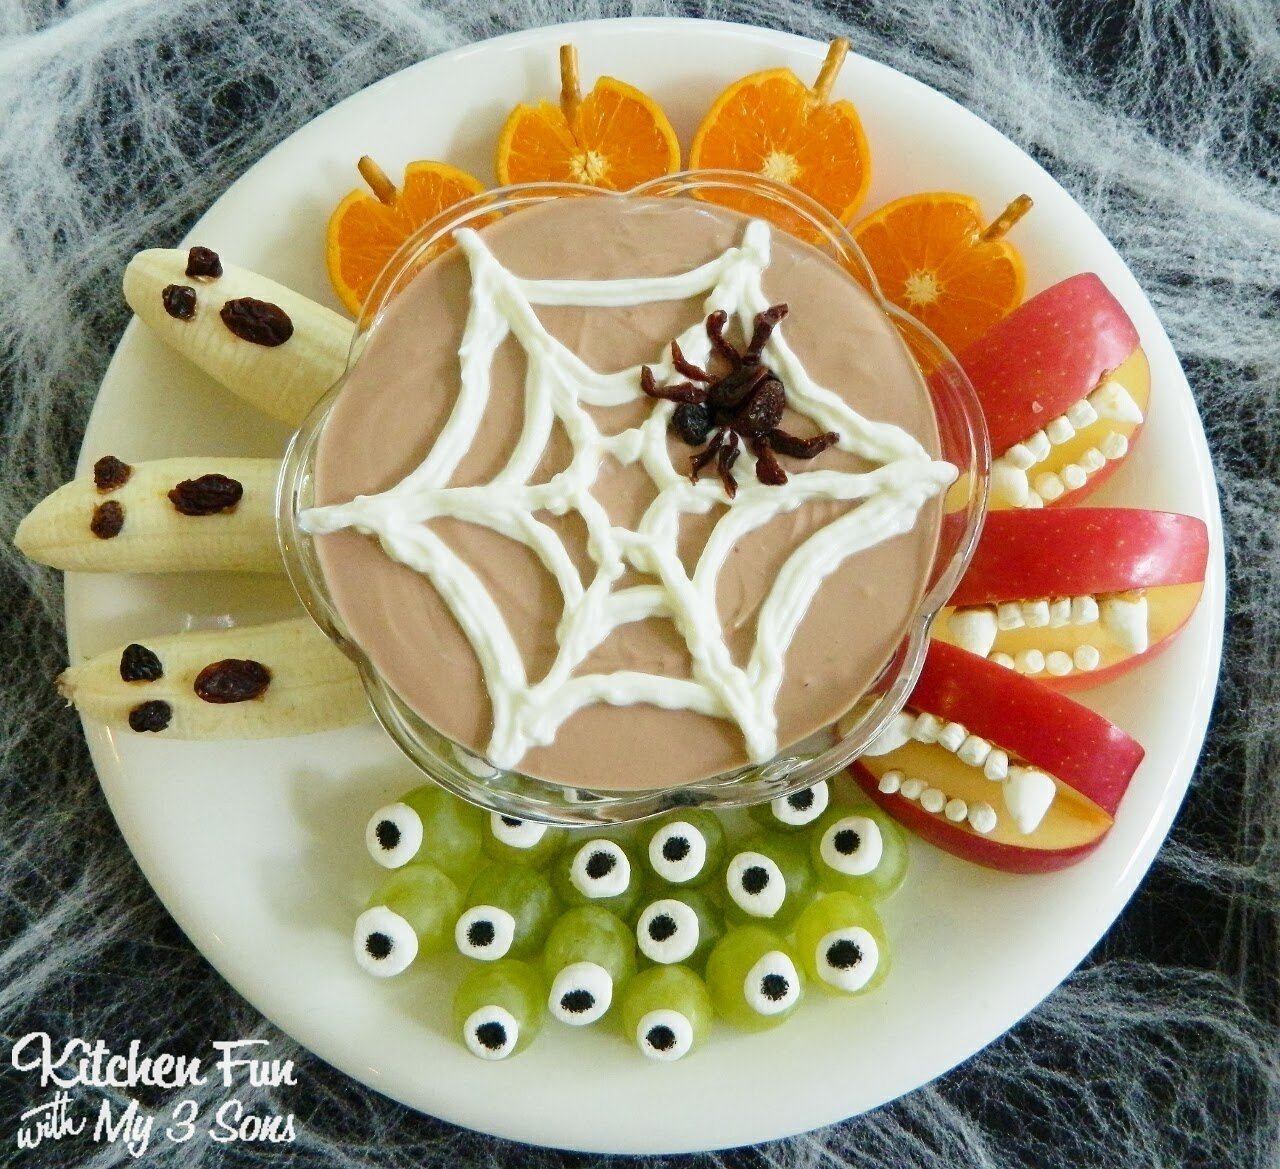 10 Lovable Halloween Food Ideas For Kids 22 of the best healthy halloween snack ideas for kids 1 2022